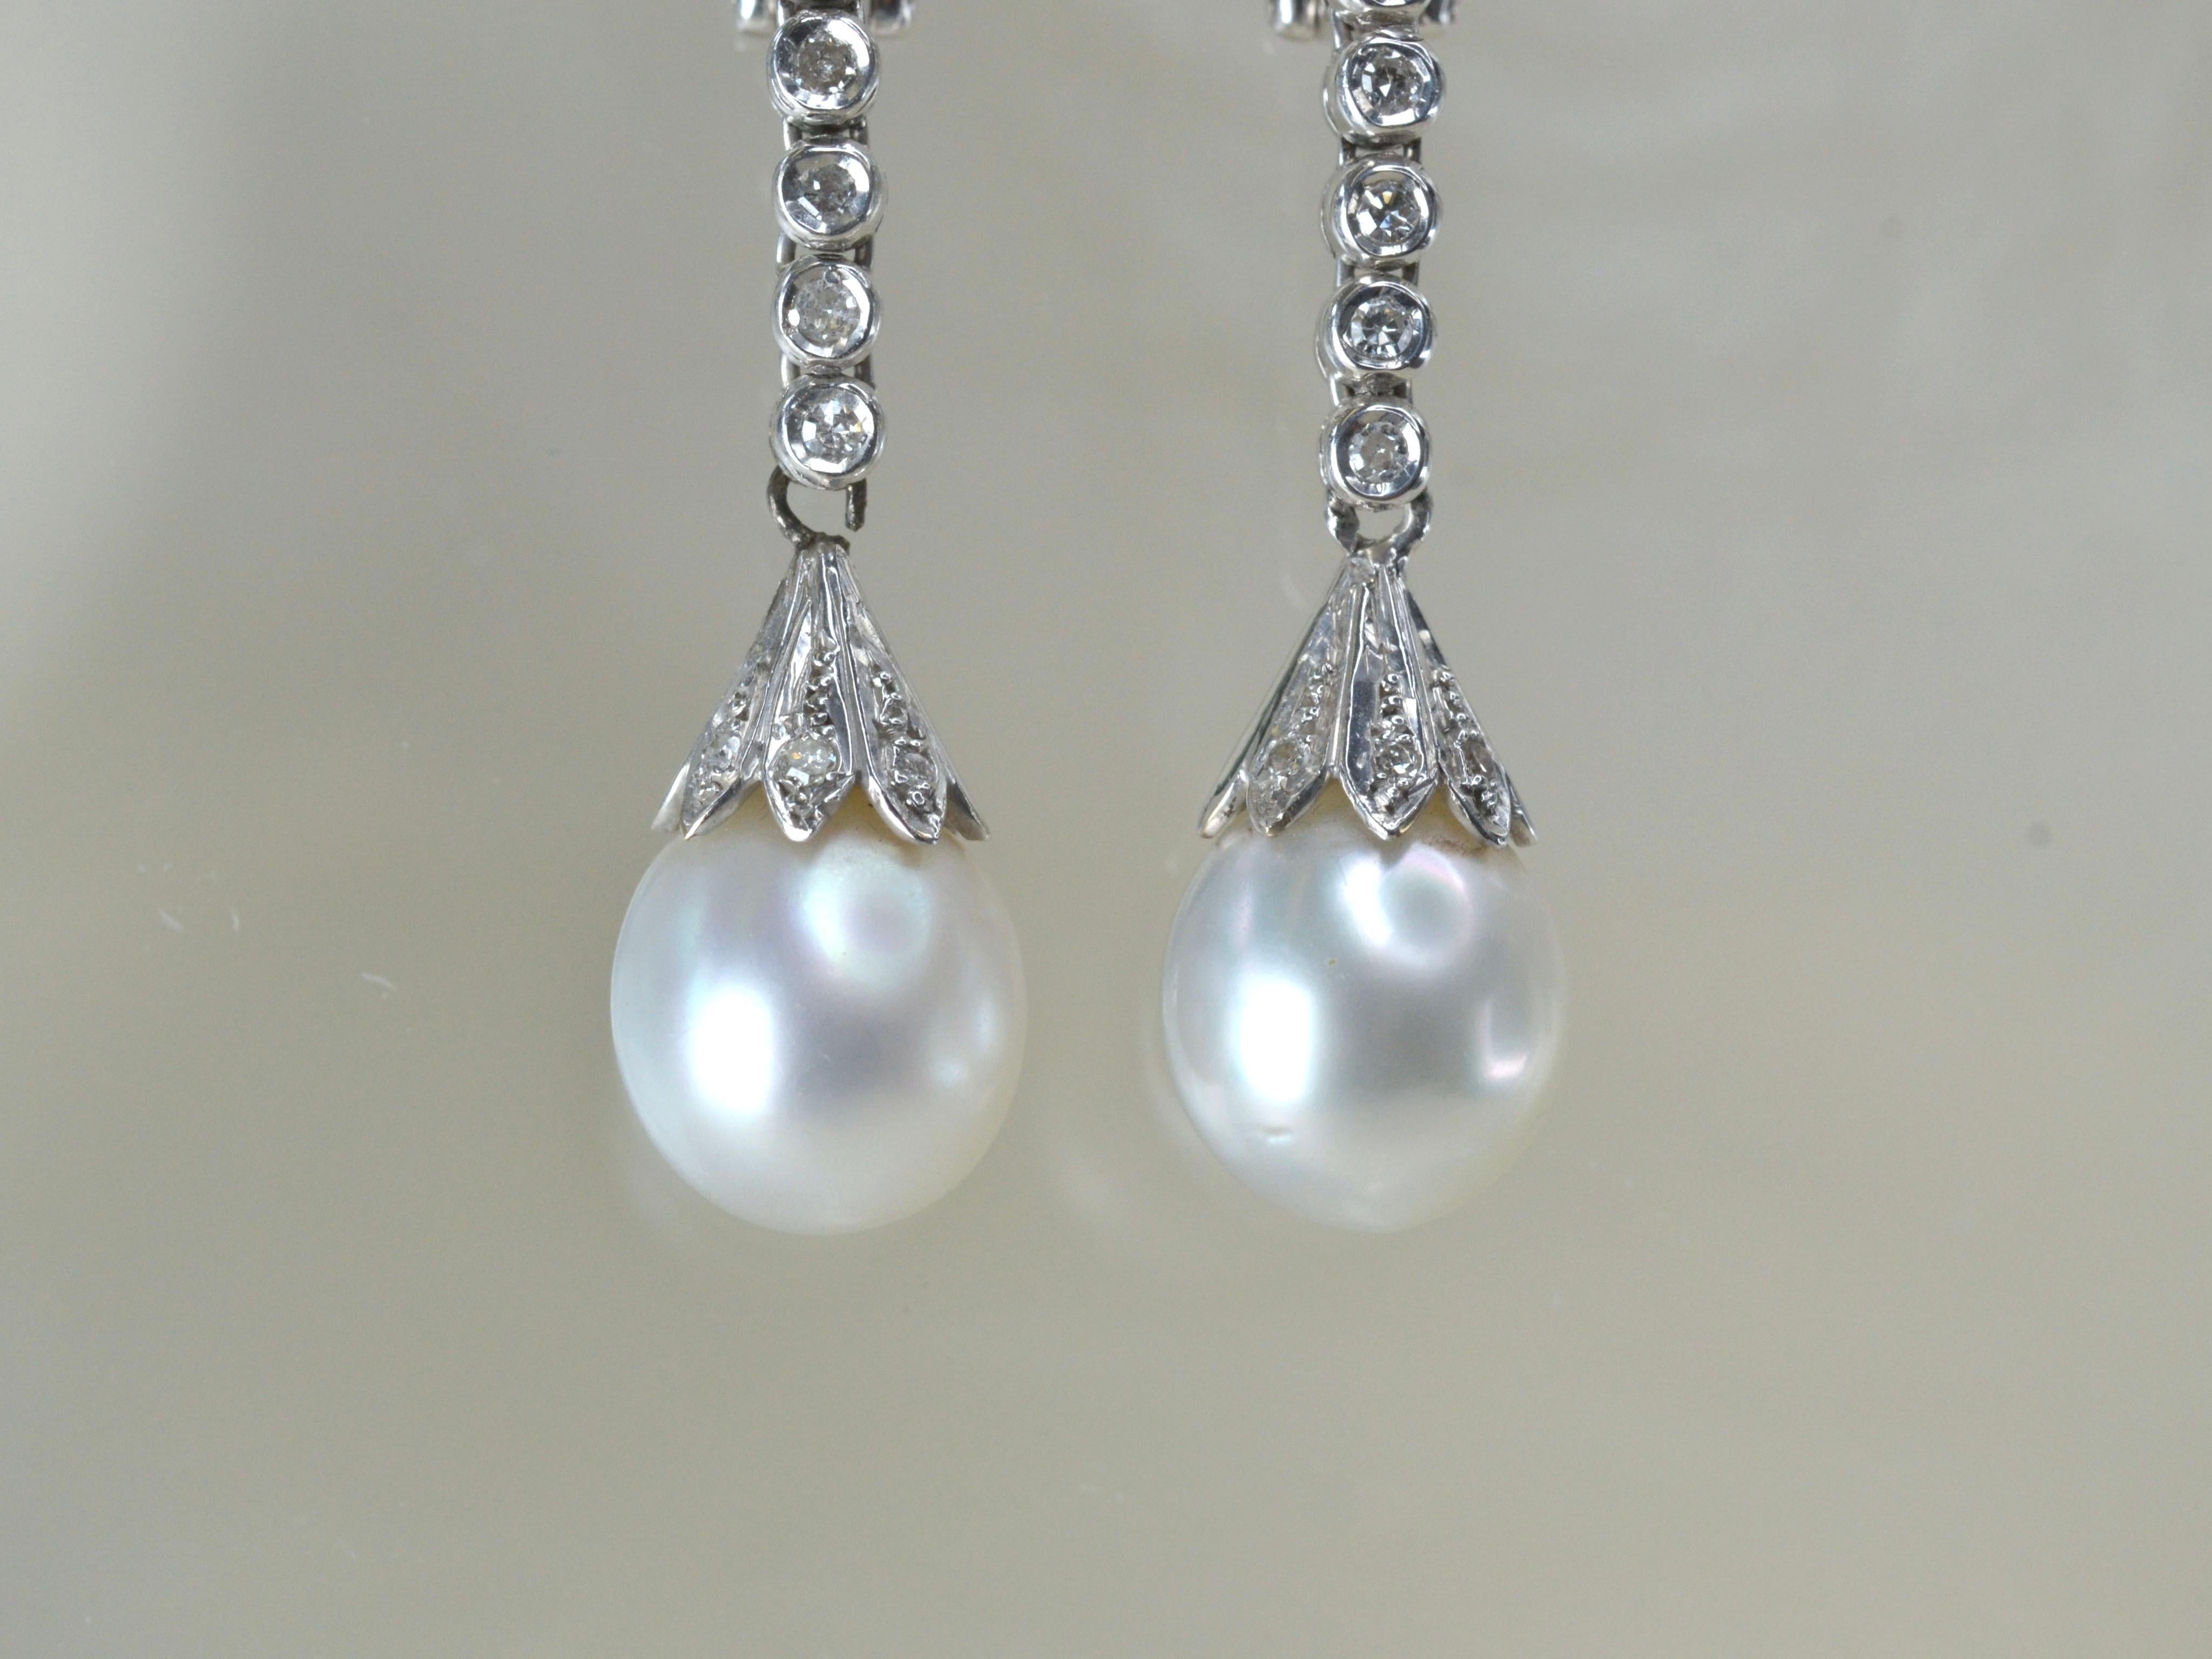 1970s Clip on Dangle Earrings. 
Each tear-drop earring features a large White Pearl, with 20 round White Diamonds set in 9 Karat White Gold. These elegant earrings are in very good condition, they're lightweight and comfortable, with good movement.